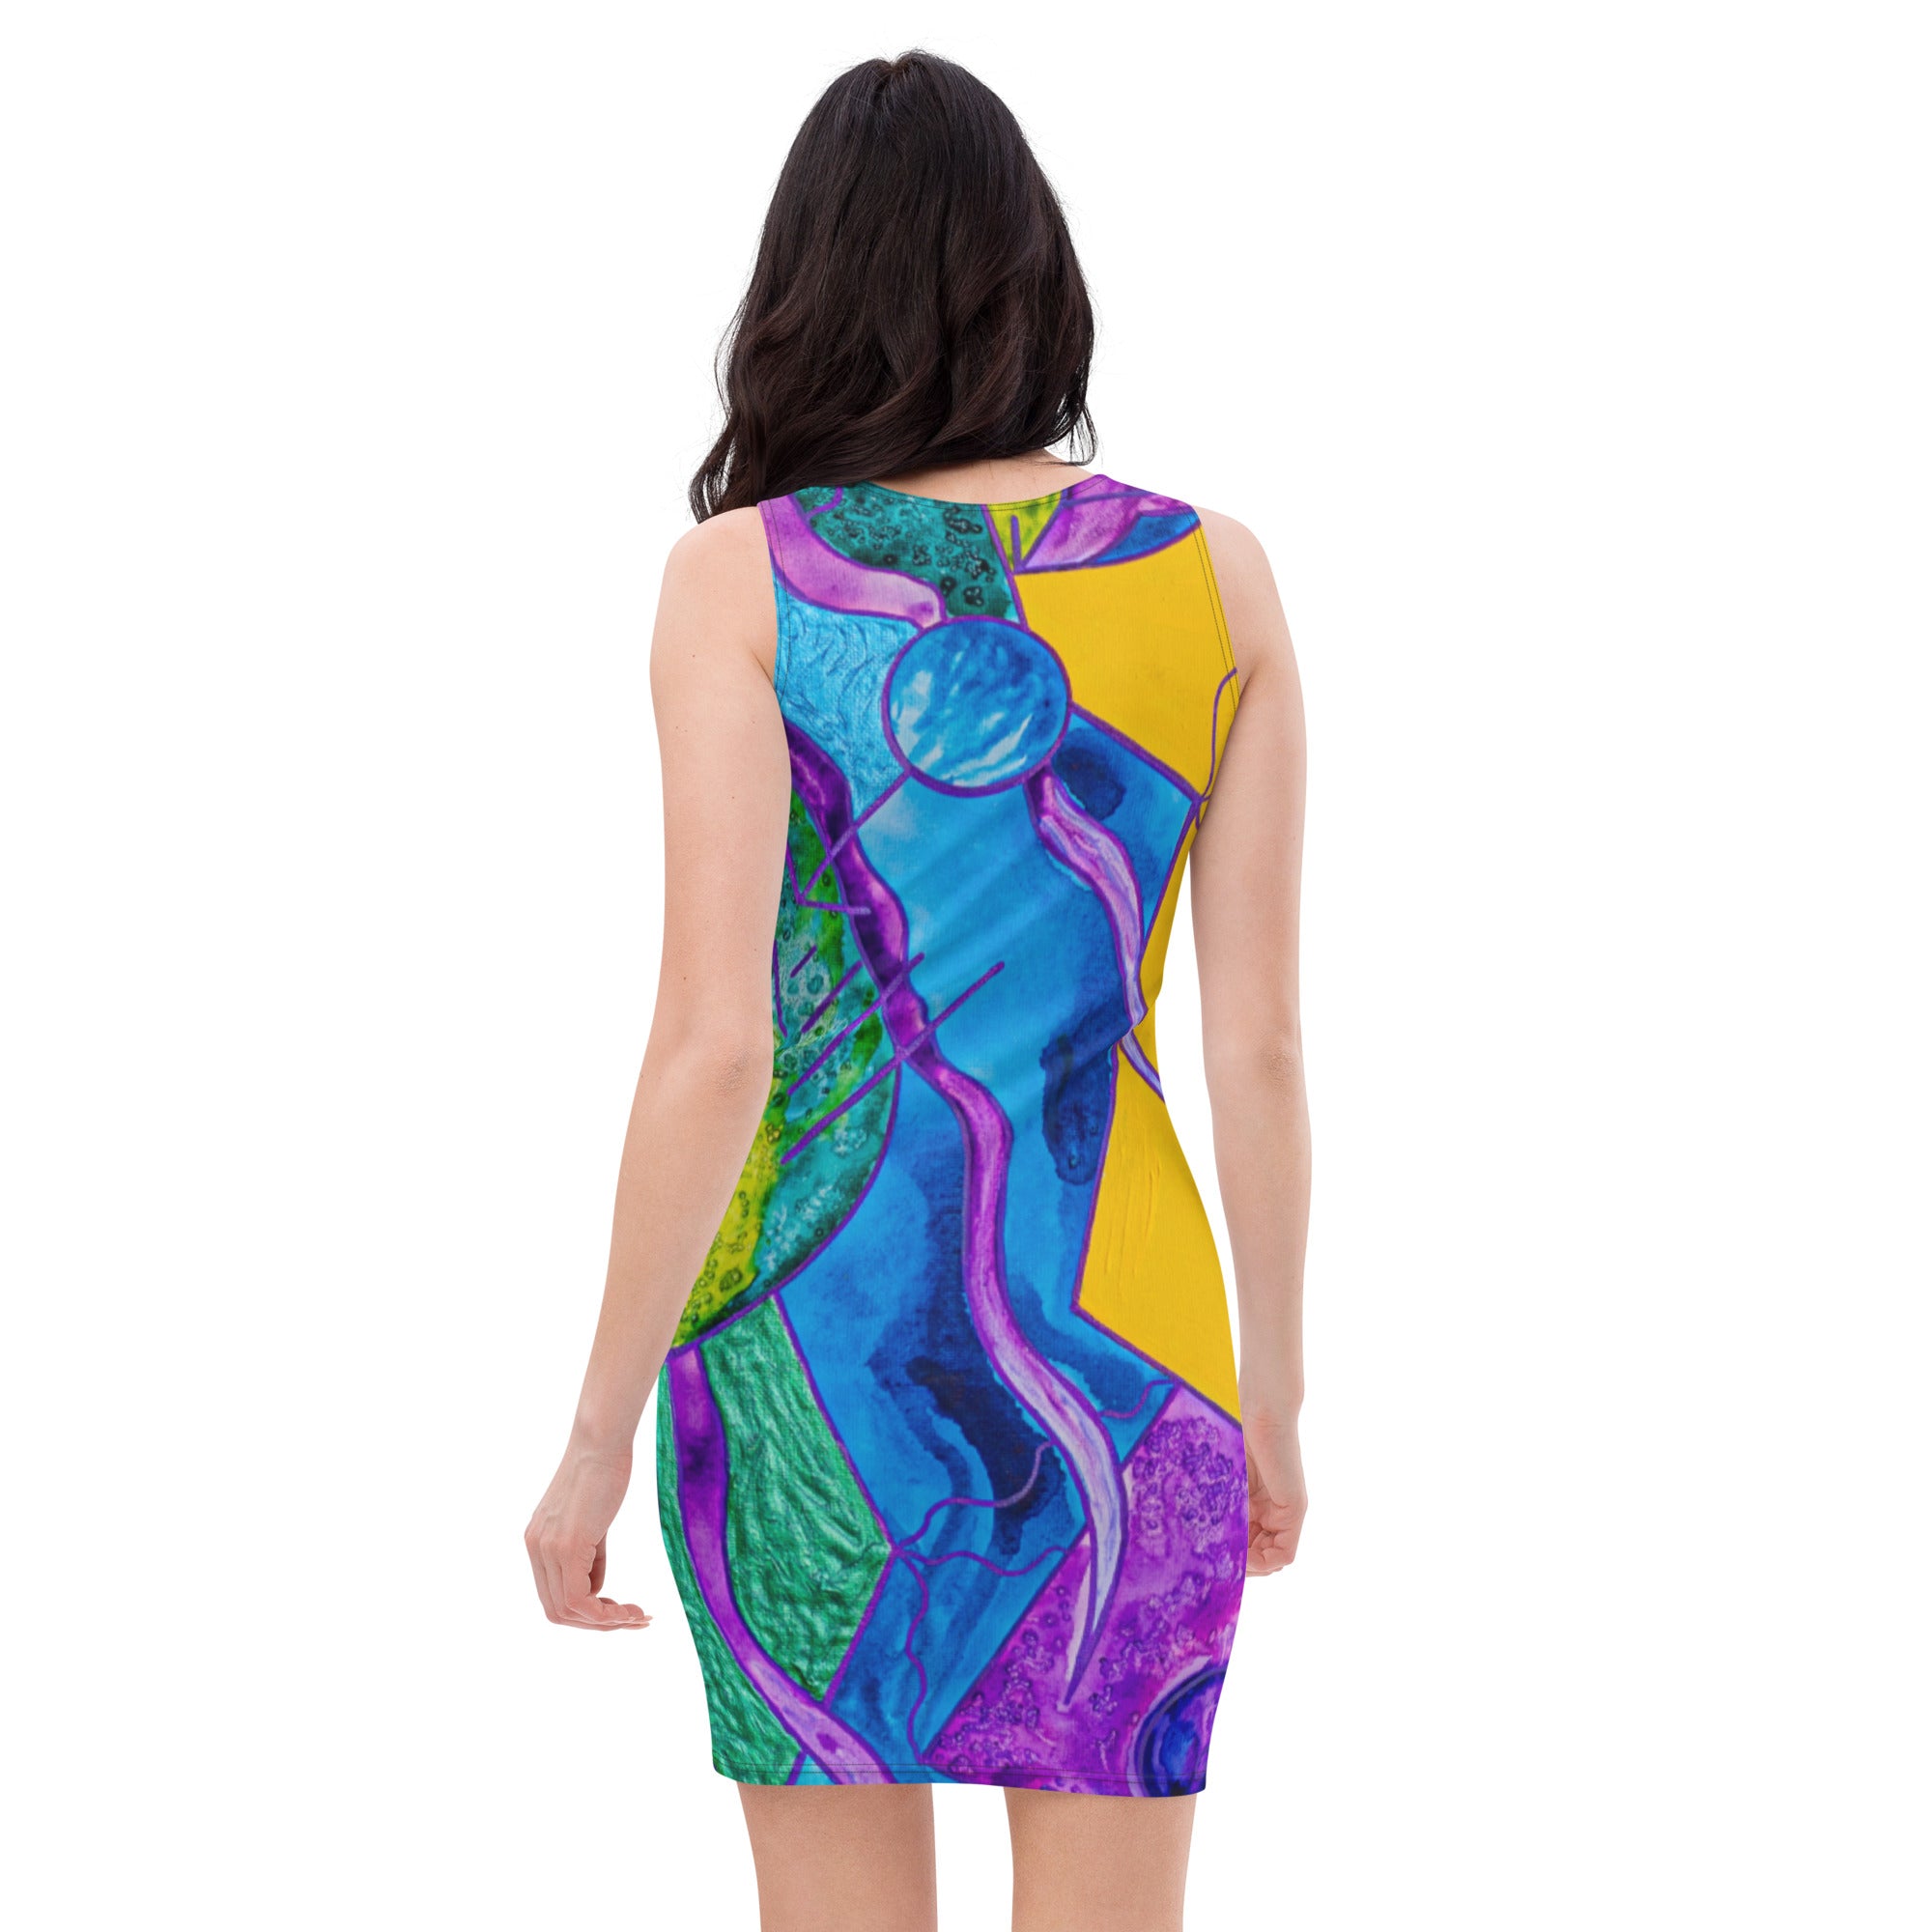 find-your-new-favorite-universal-current-sublimation-cut-sew-dress-discount_1.jpg